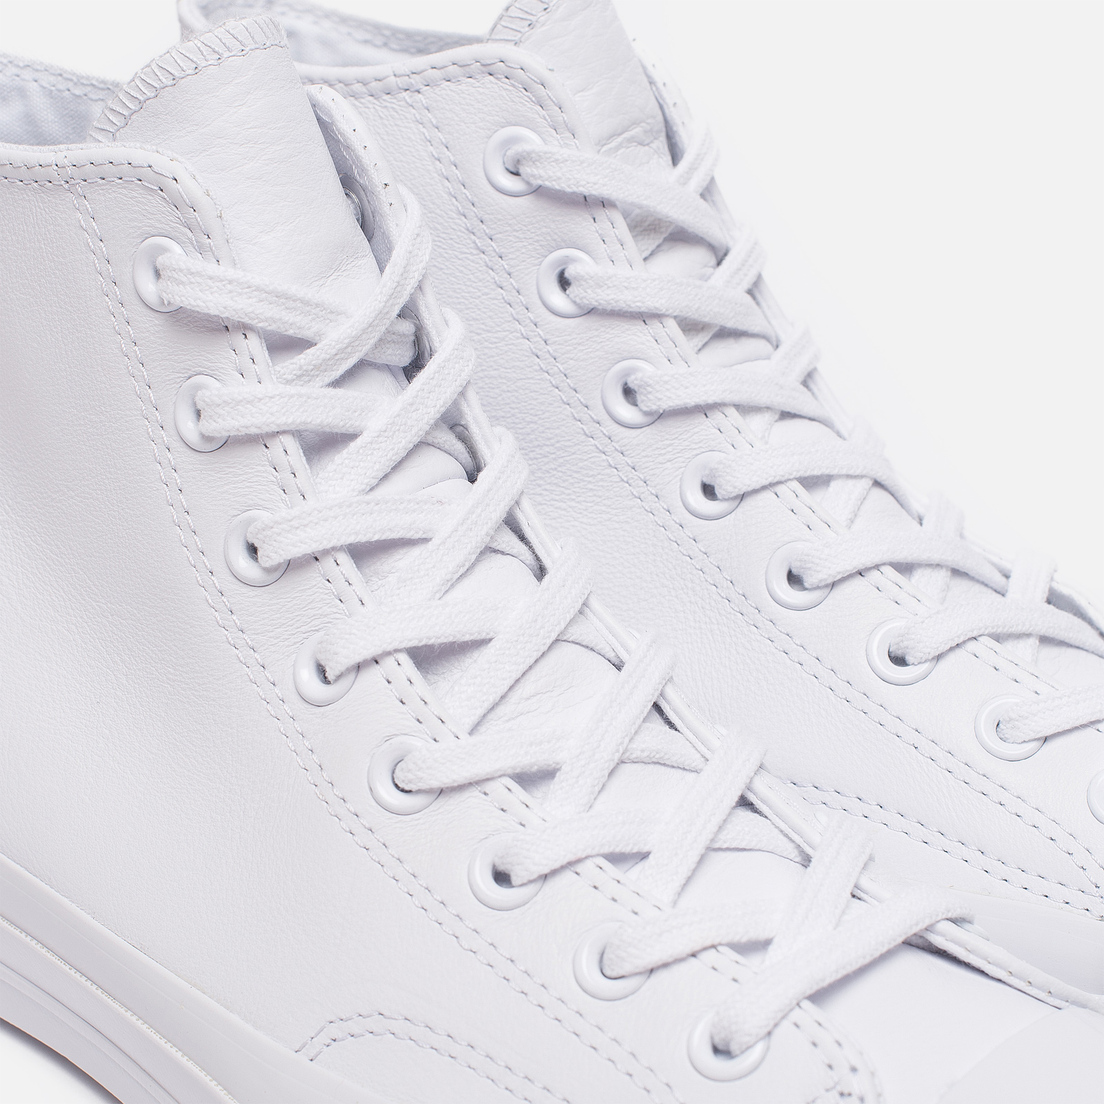 chuck taylor all star 70 high top white